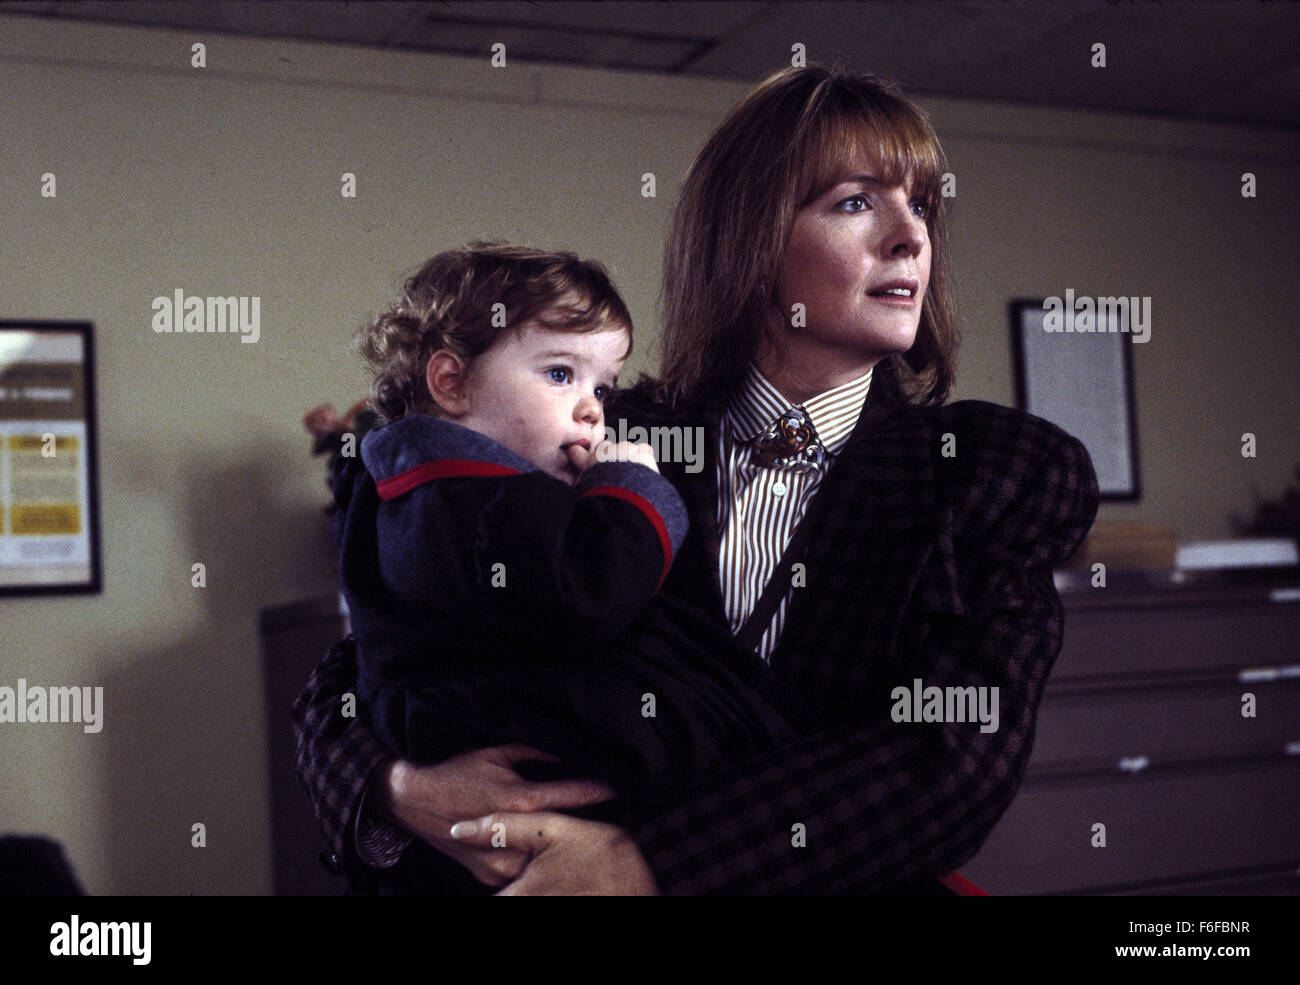 Sep 17, 1987; New York, NY, USA; DIANE KEATON as J.C. Wiatt in the romantice comedy film ''Baby Boom'' directed by Charles Shyer. Stock Photo